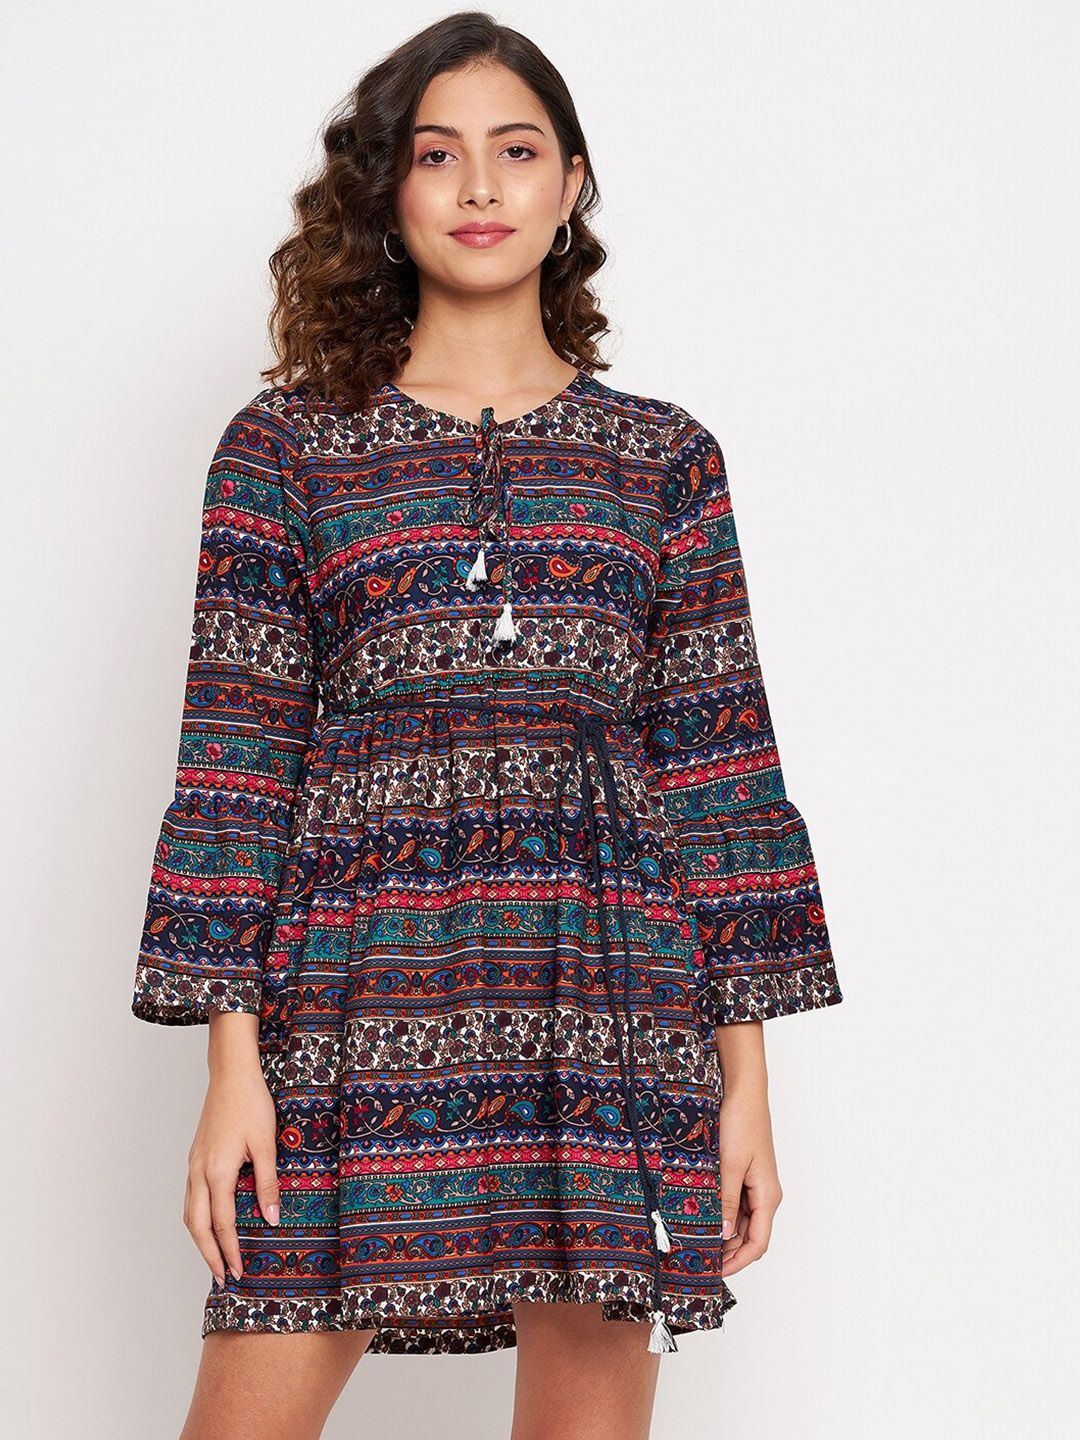 JHANKHI Multicoloured Tie-Up Neck Fit and Flare Boho Dress Price in India